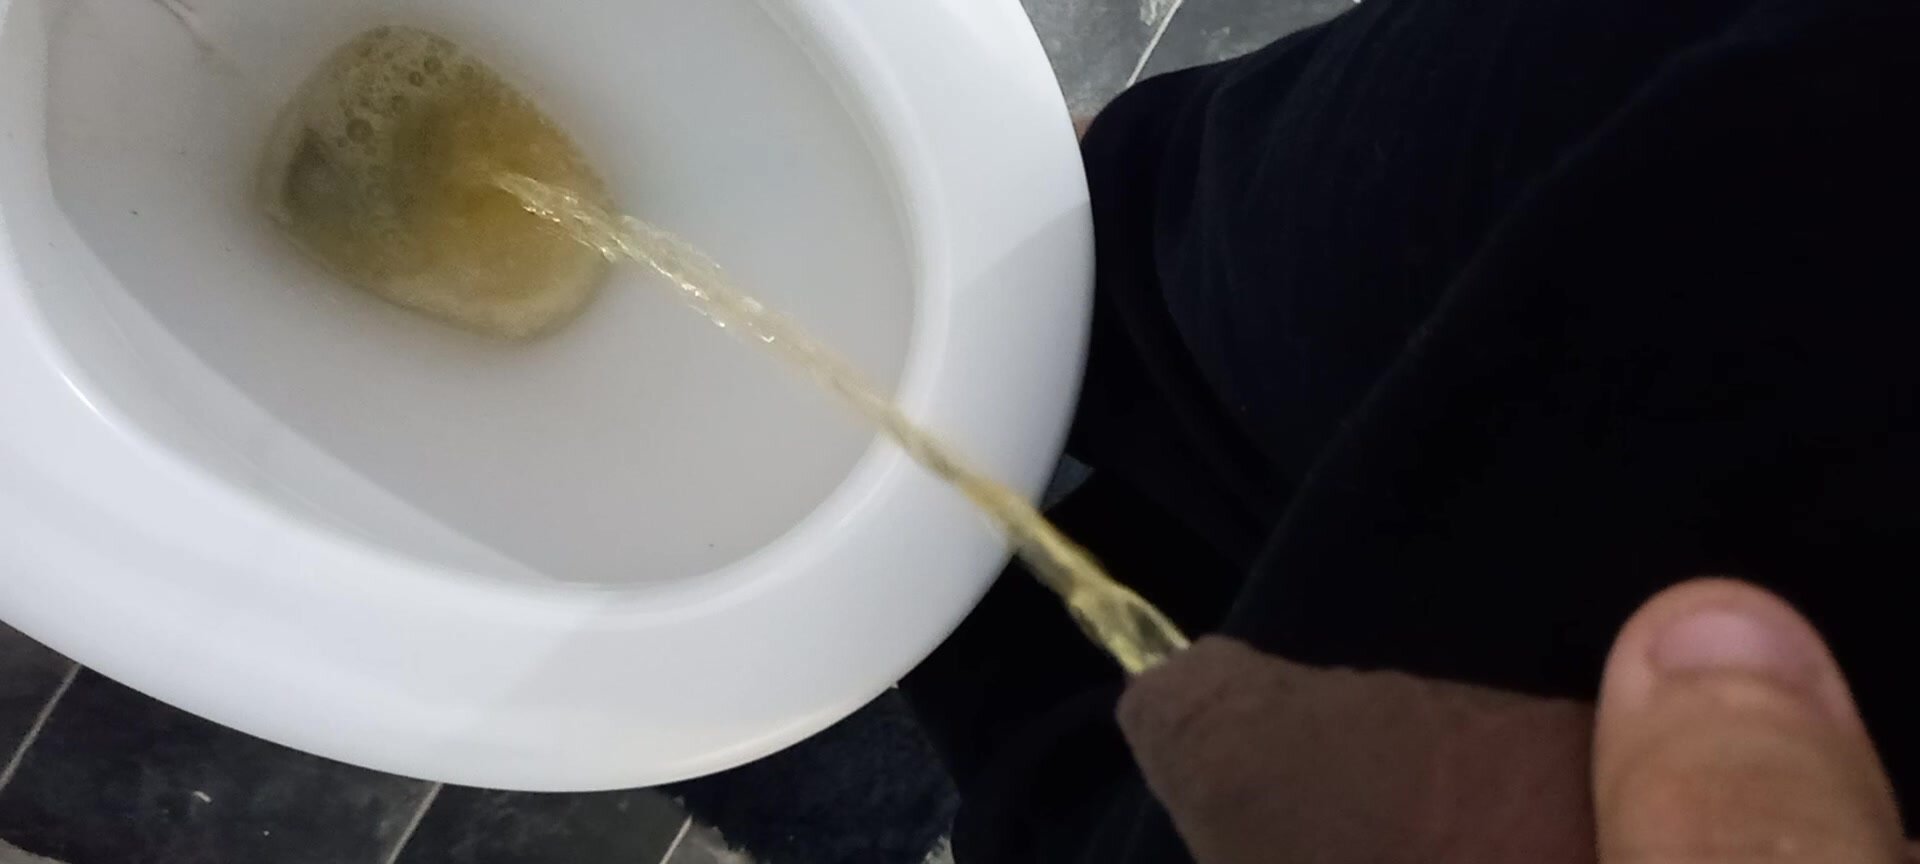 Pissing all in the bowl